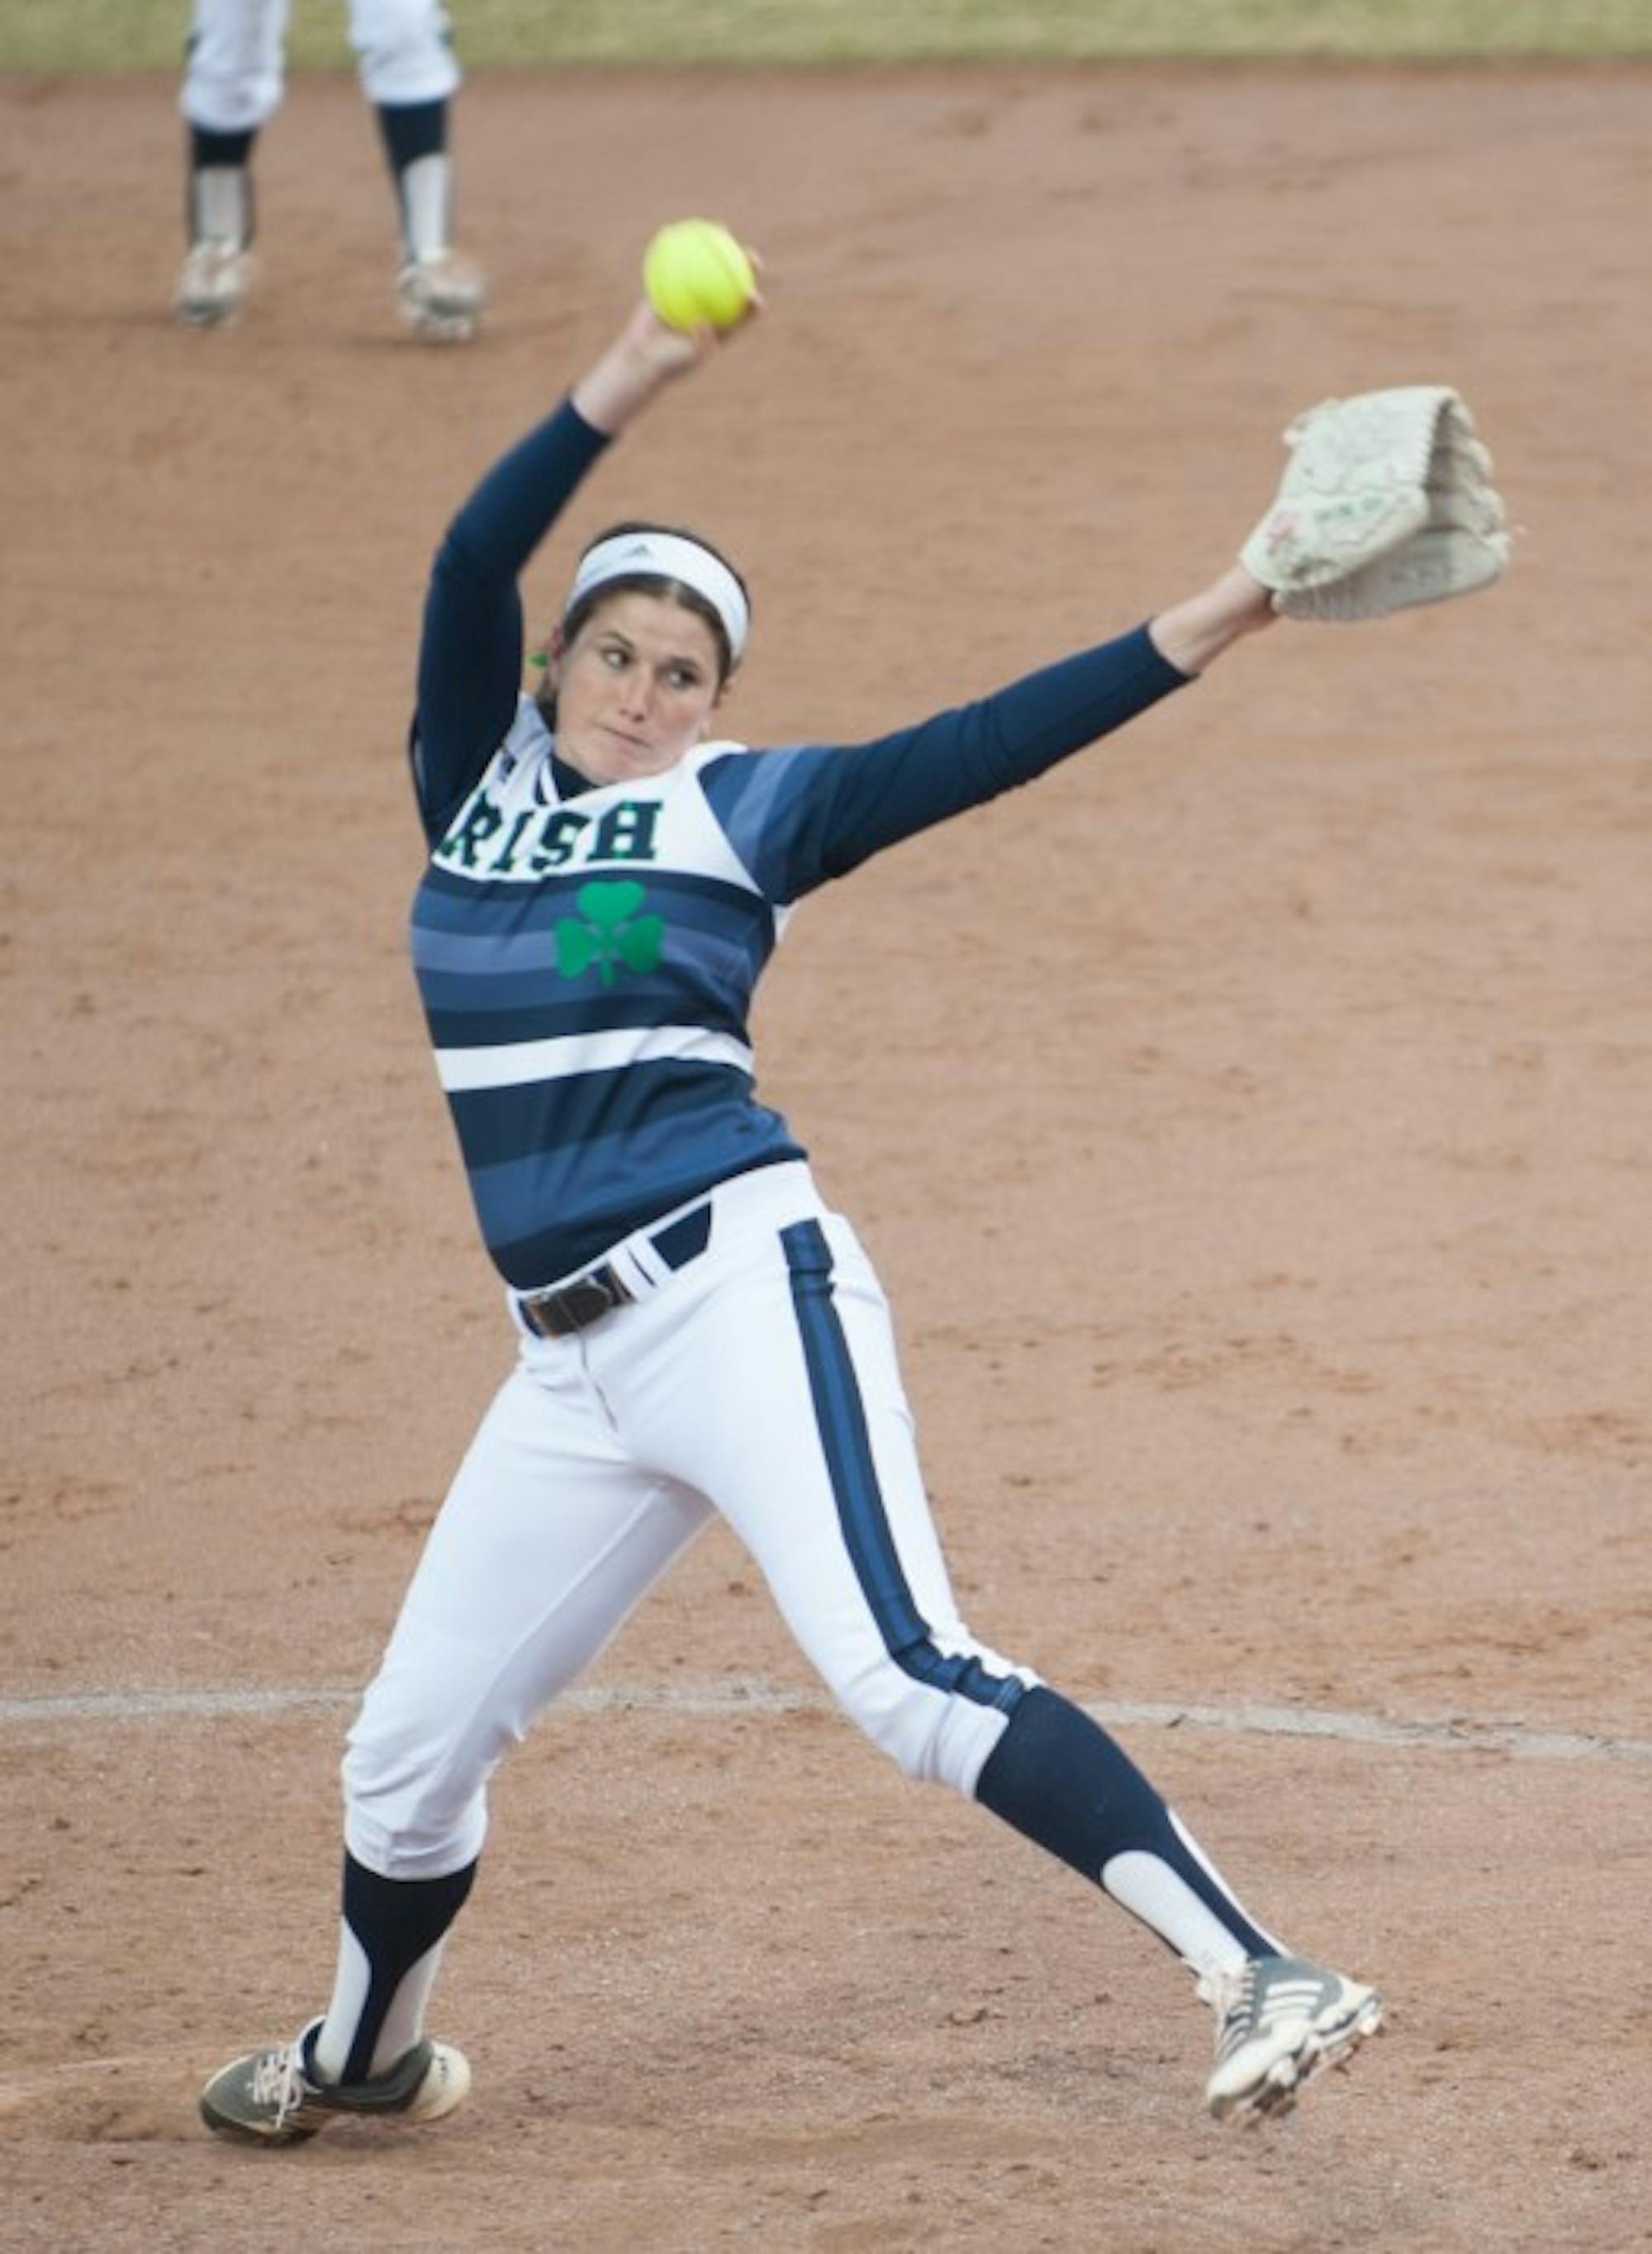 Sophomore Rachel Nasland winds up during a April 2 game against Michigan State, an 11-4 Irish victory at Melissa Cook Stadium.